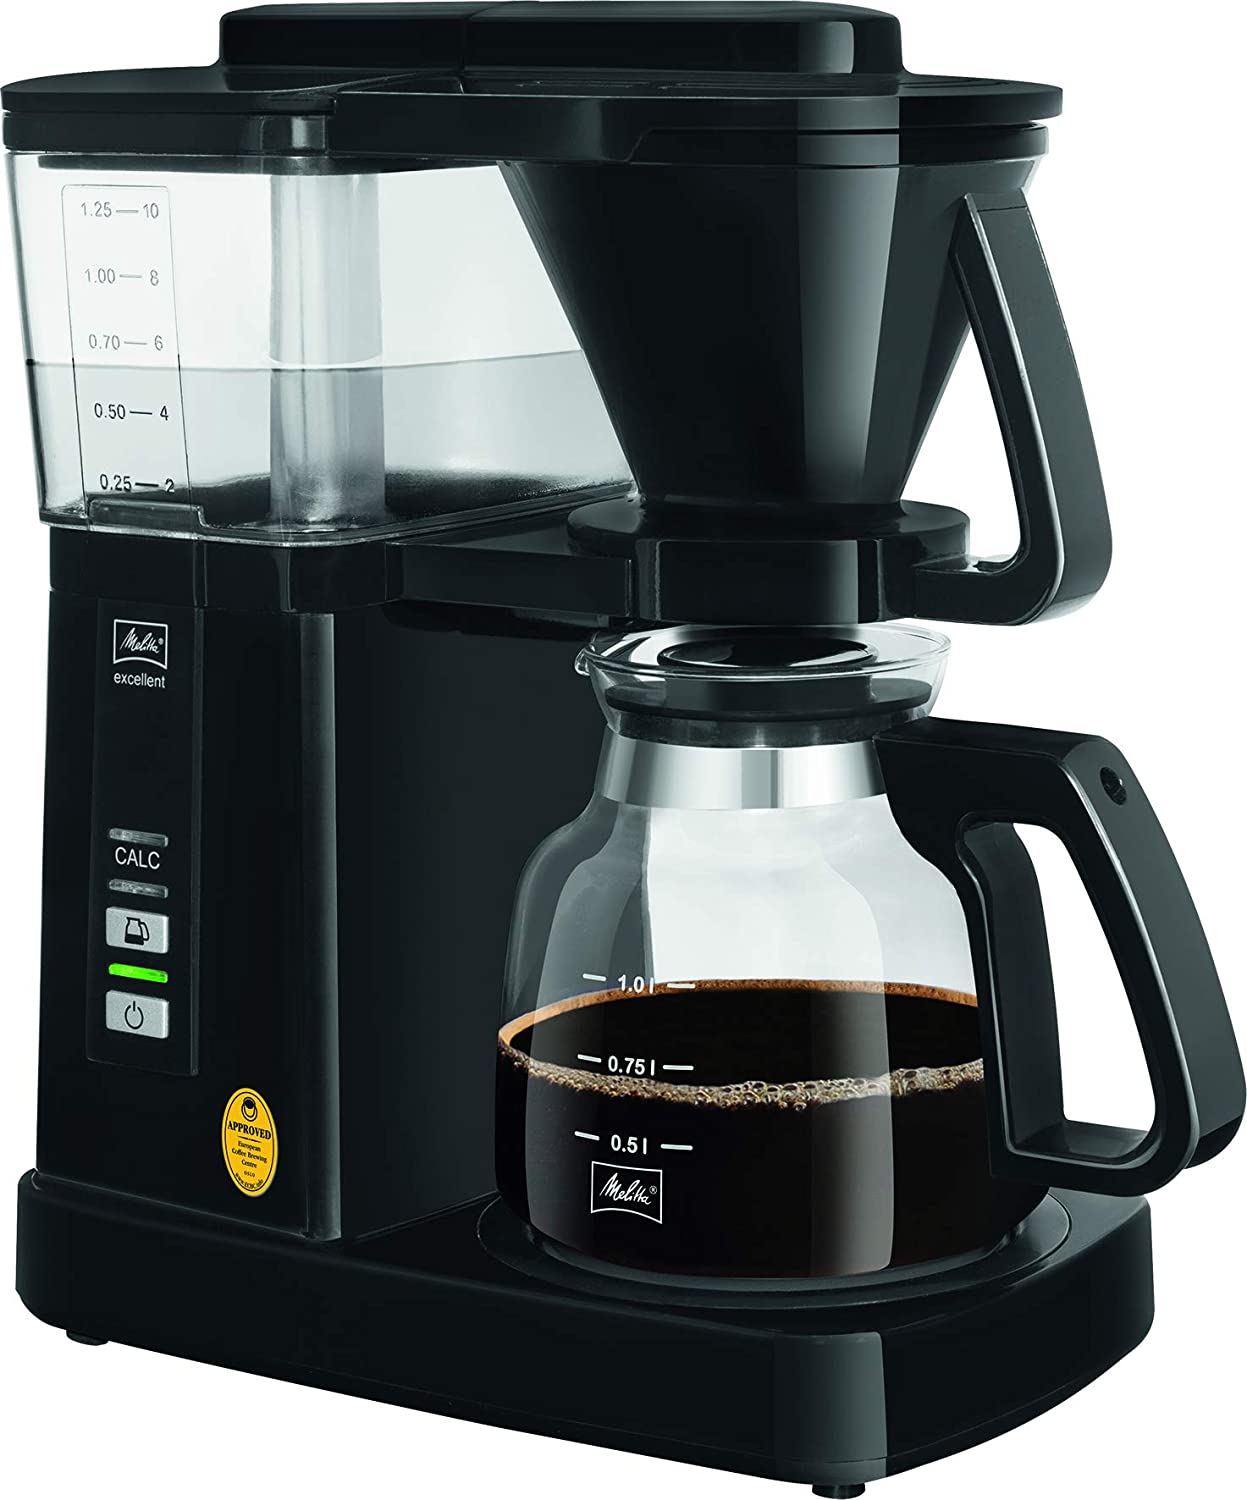 Melitta Excellent 5.0, 102202: The success story of the excellent coffee taste continues, black